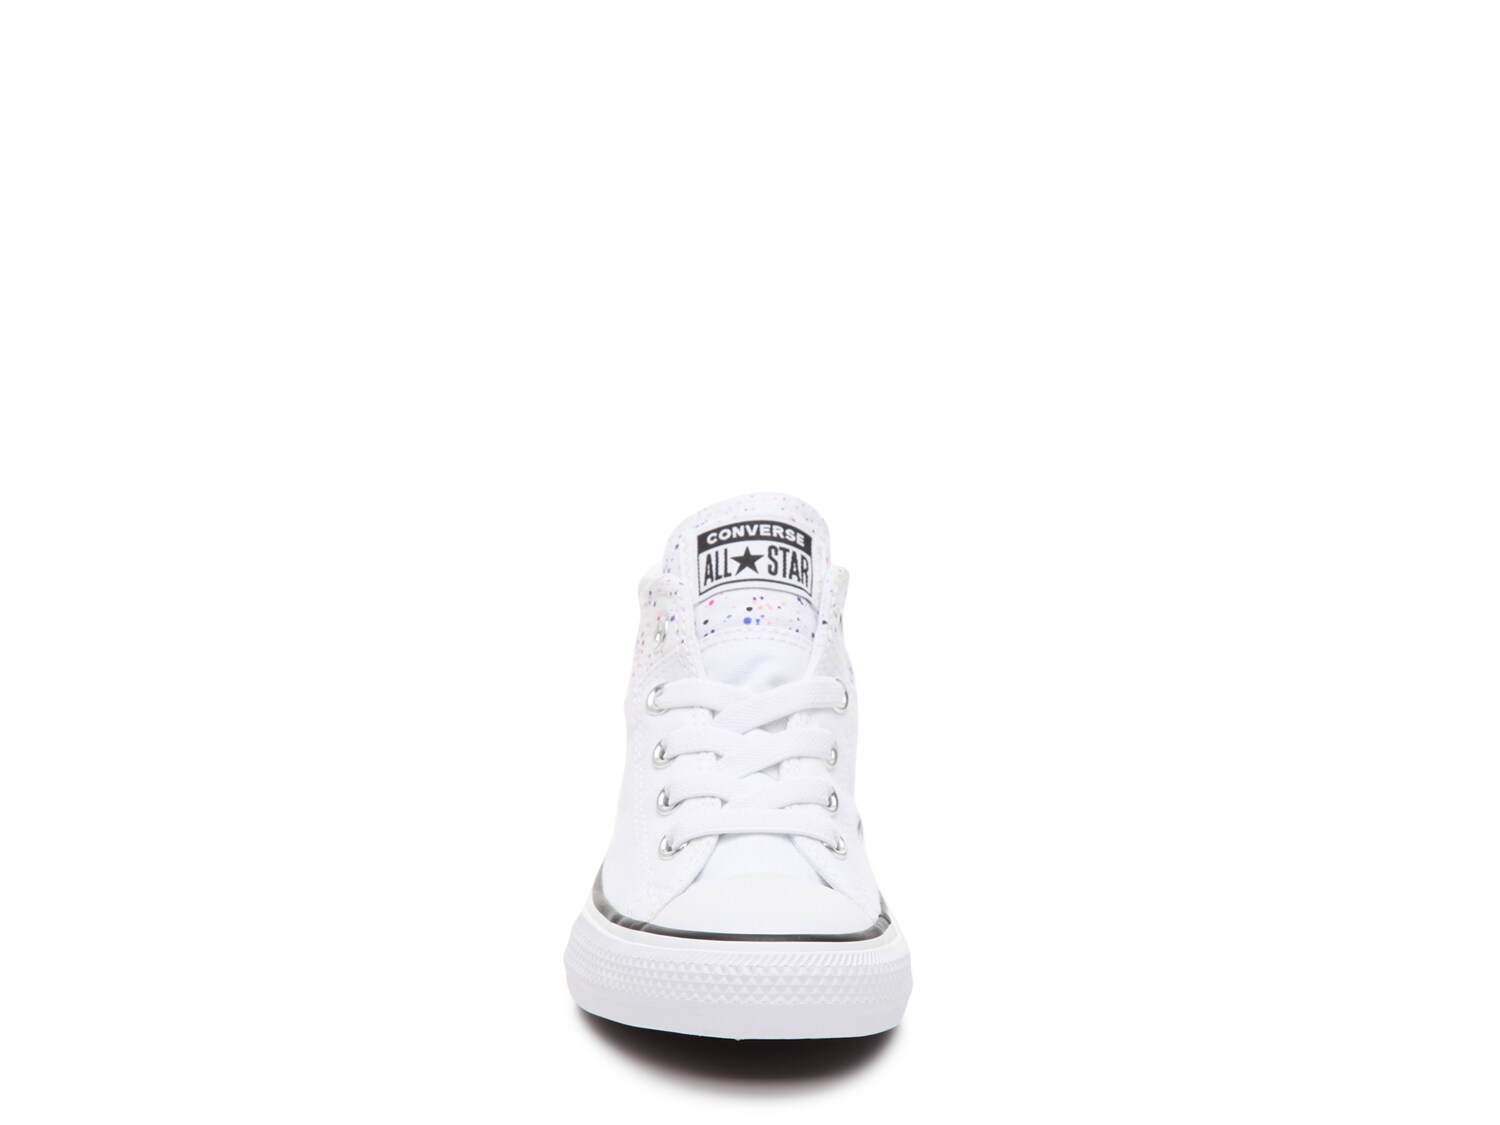 women's chuck taylor all star madison mid top sneaker